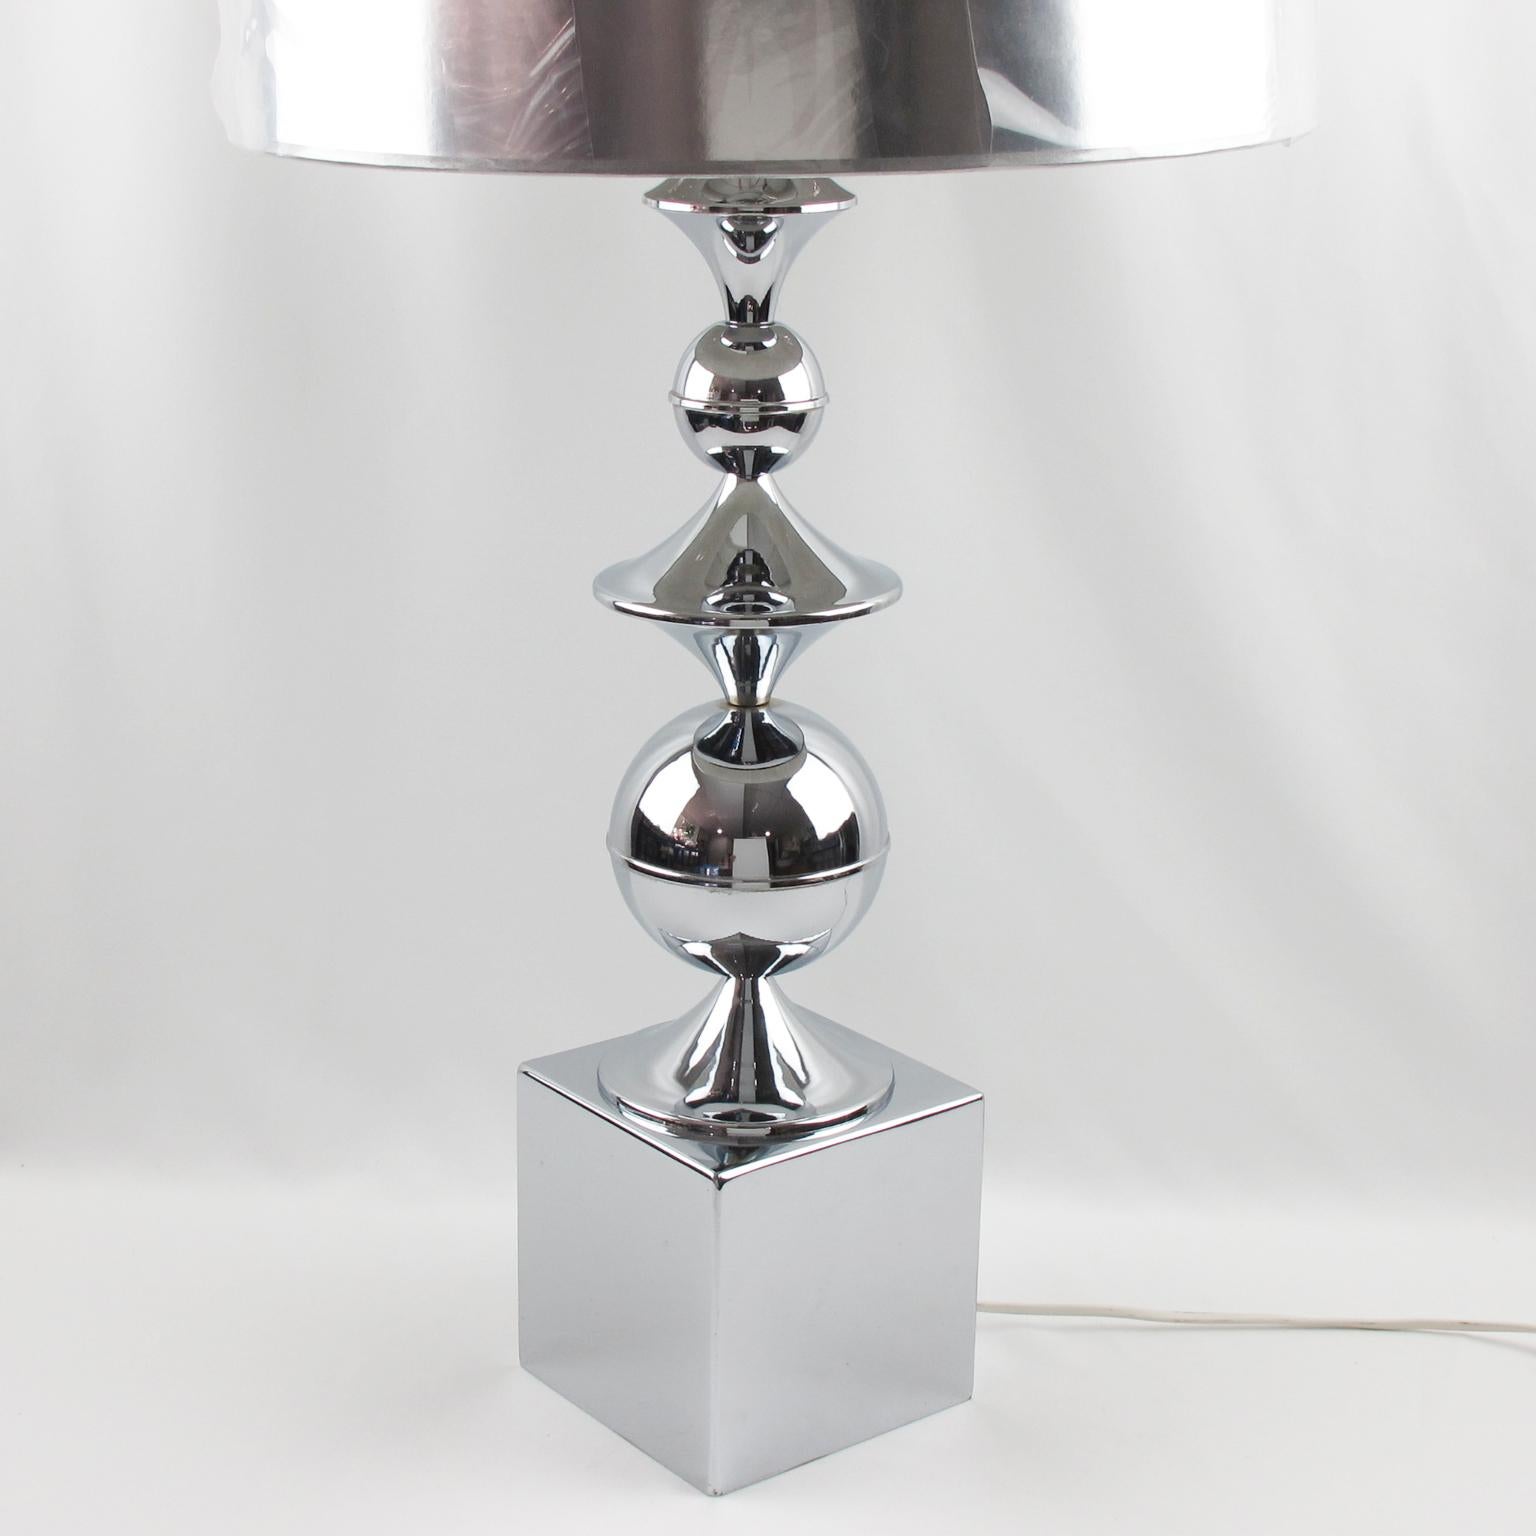 Philippe Barbier designed this elegant modernist Space Age table lamp for Maison Barbier Paris in the 1970s. The tall geometric shape has polished chromed metal elements. The item complies with the electrical standards of the United States. The sale